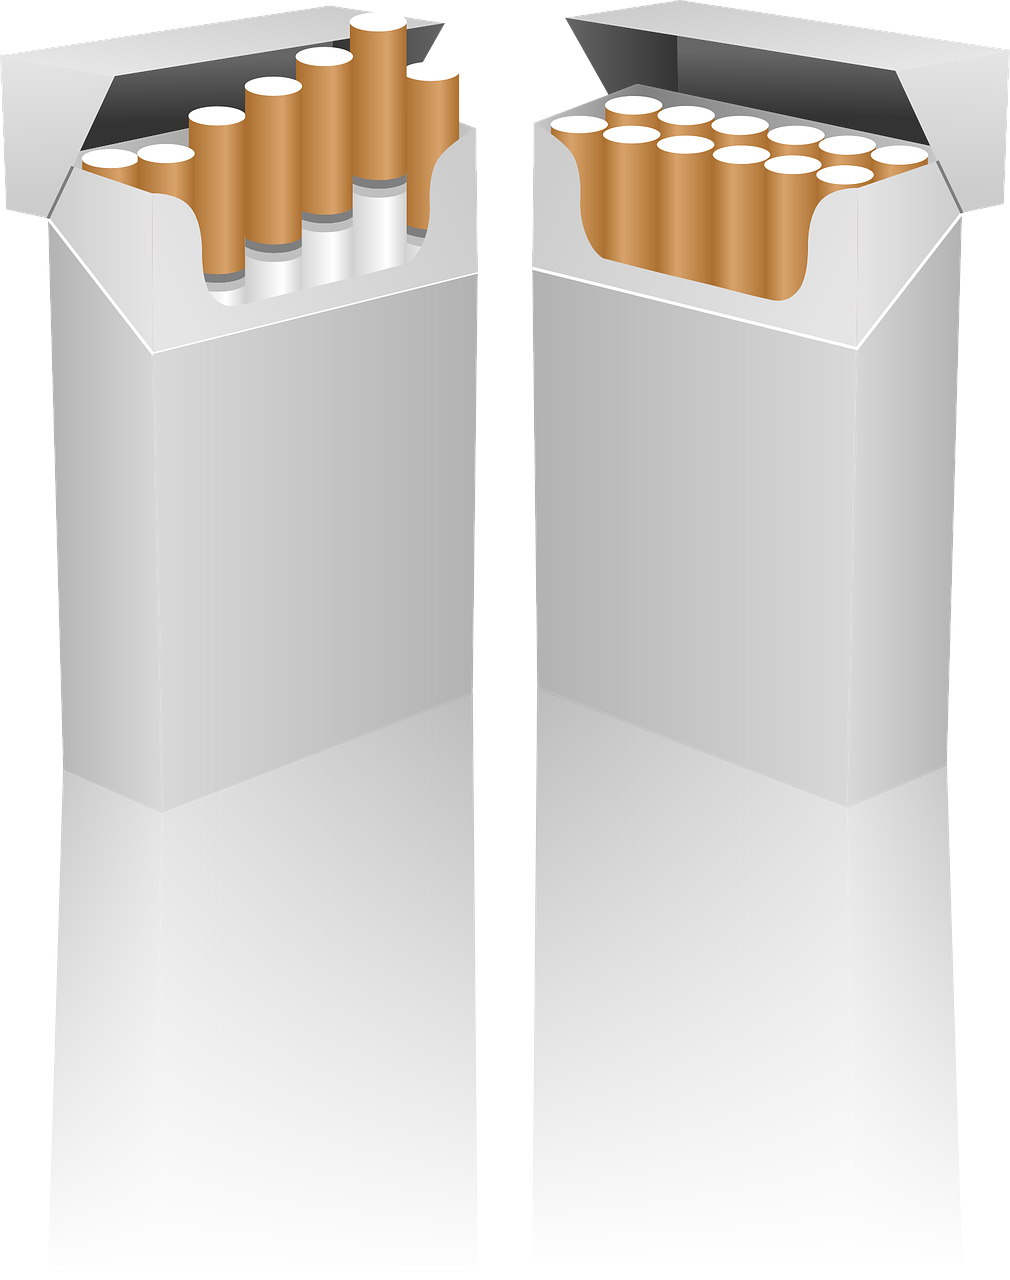 Open Packof Cigarettes PNG